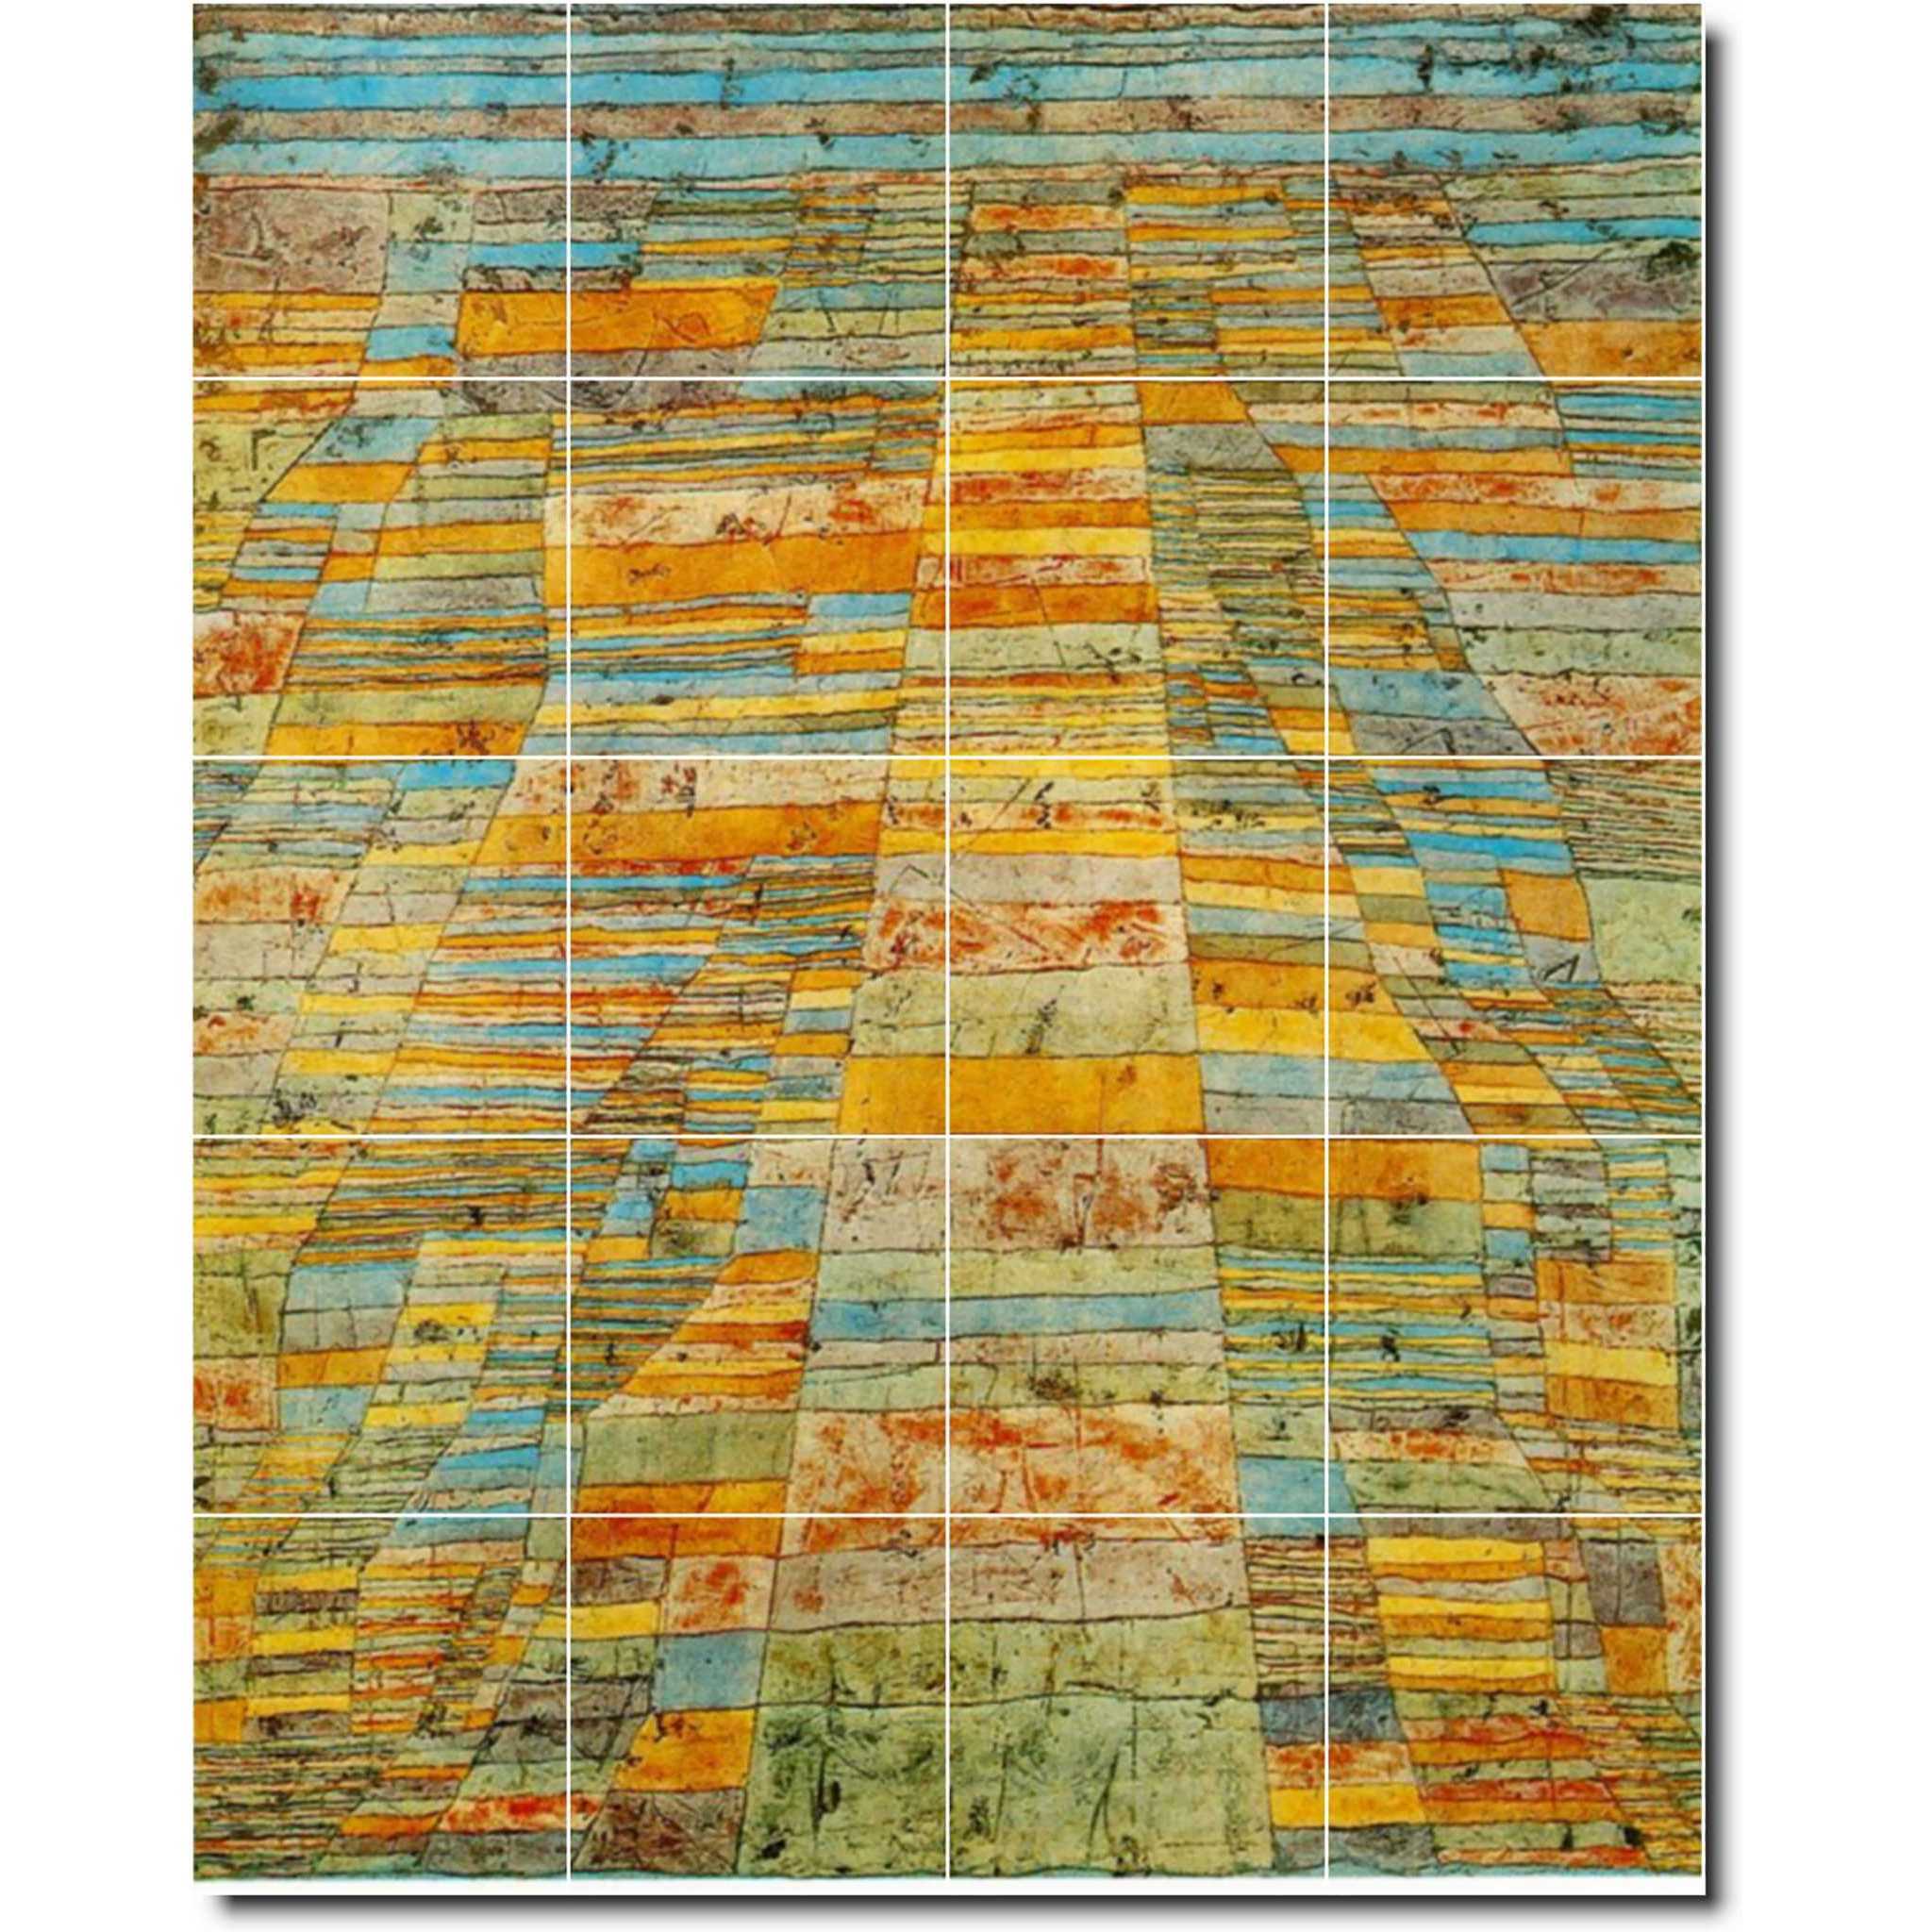 Paul Klee Abstract Painting Ceramic Tile Mural P04965-XL. 48"W x 60"H (20) 12x12 tiles